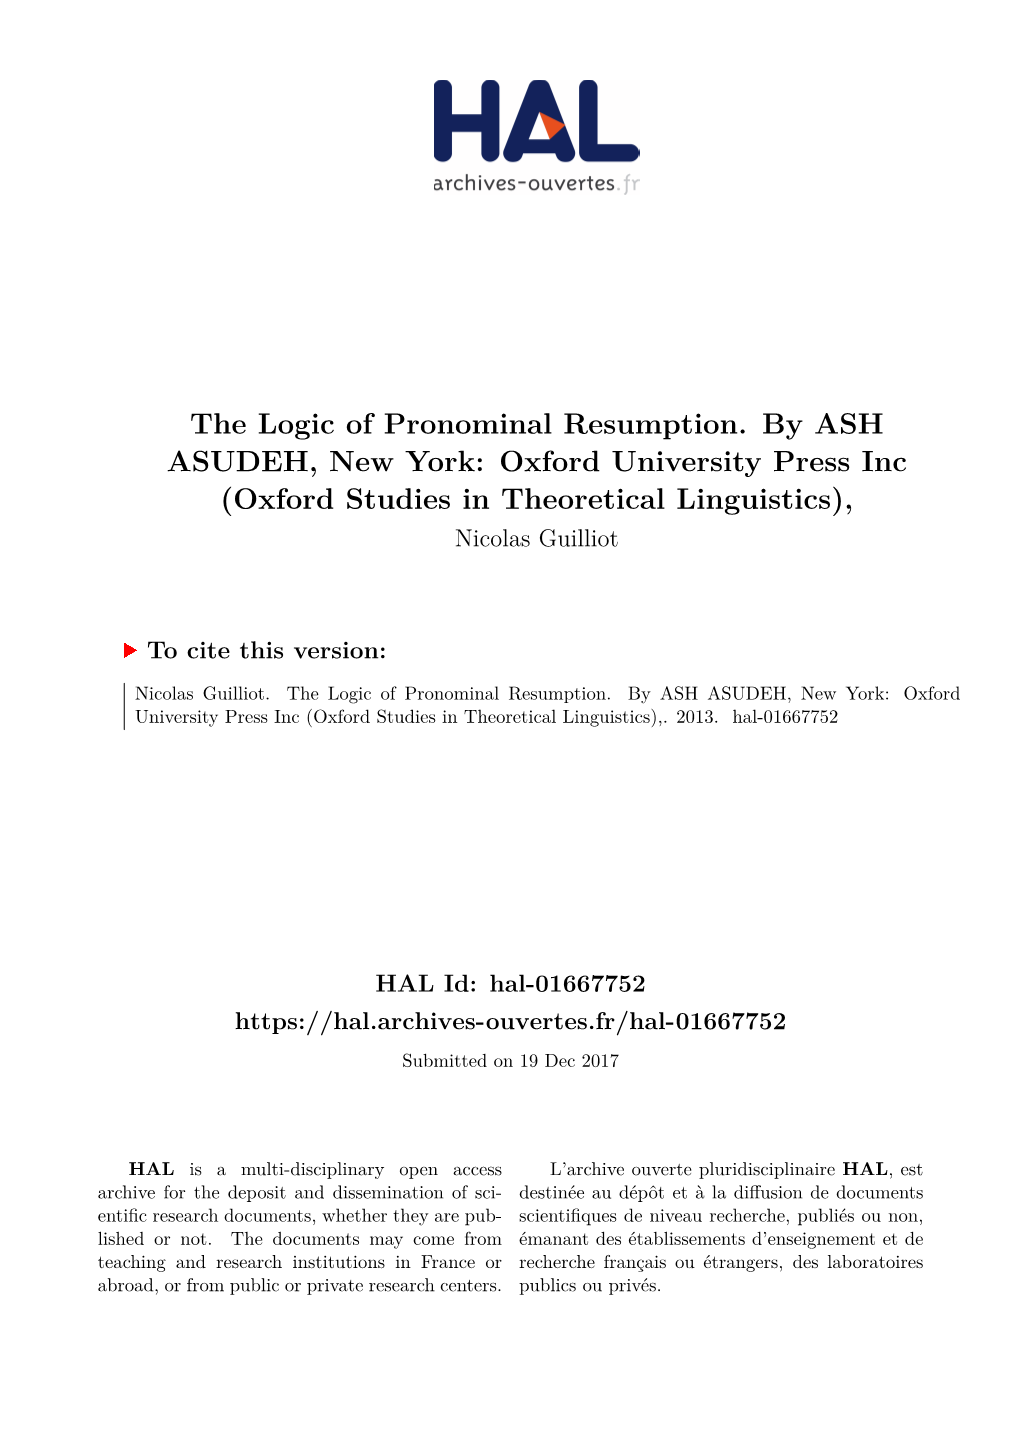 The Logic of Pronominal Resumption. by ASH ASUDEH, New York: Oxford University Press Inc (Oxford Studies in Theoretical Linguistics), Nicolas Guilliot